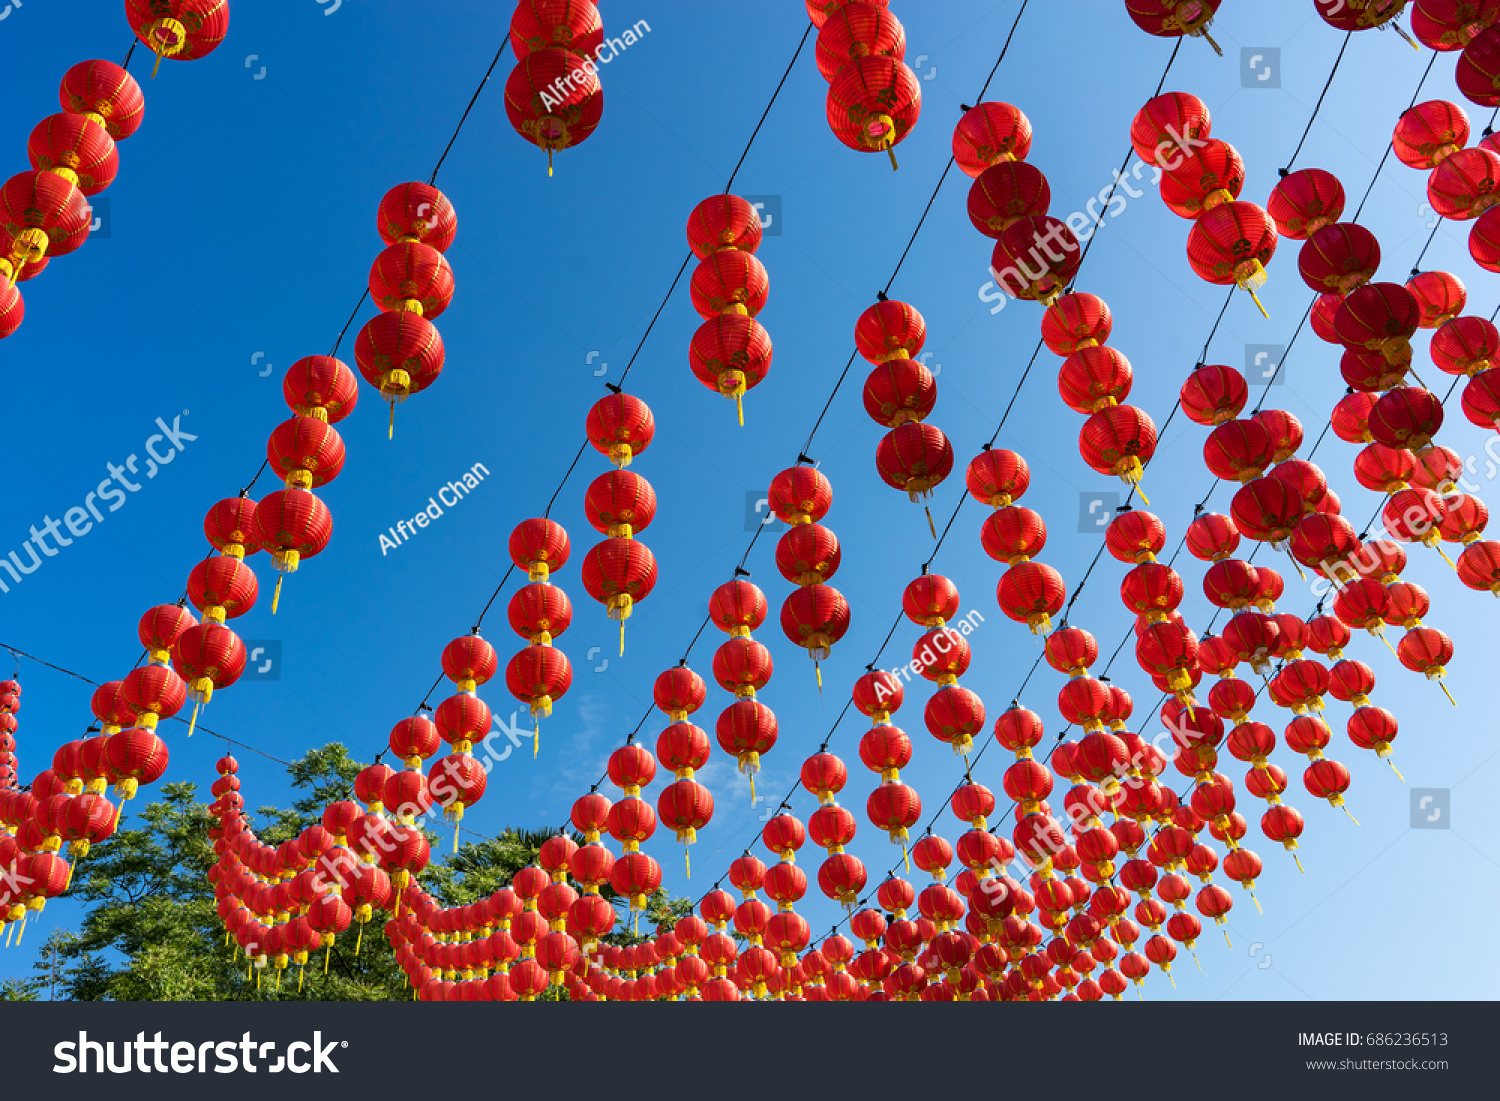 Red Lanterns Lined During Festive Season Stock Photo Edit Now 686236513